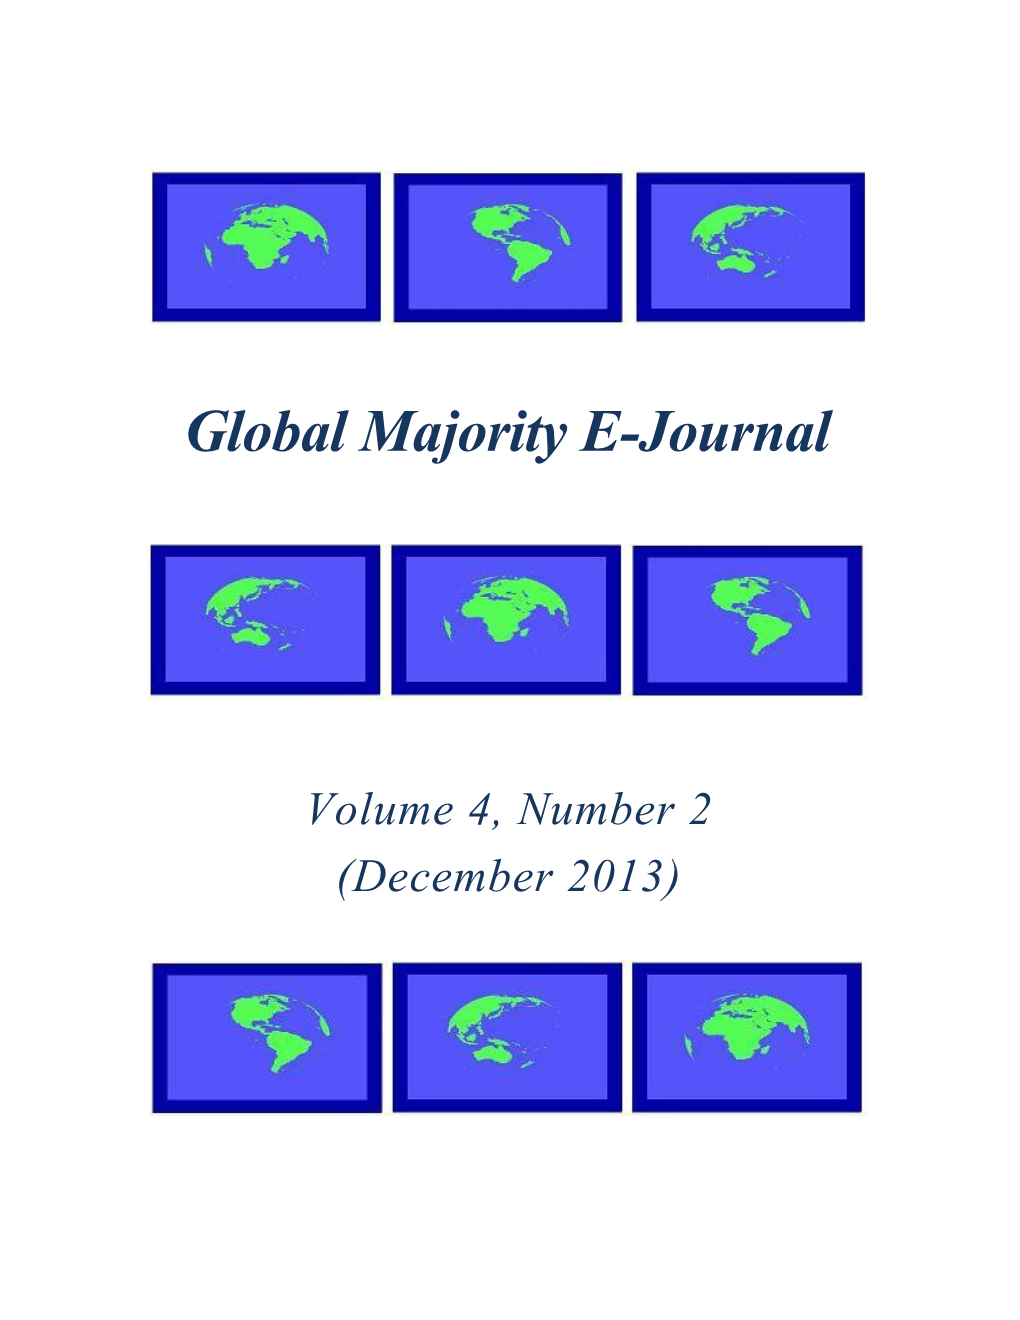 About the Global Majority E-Journal